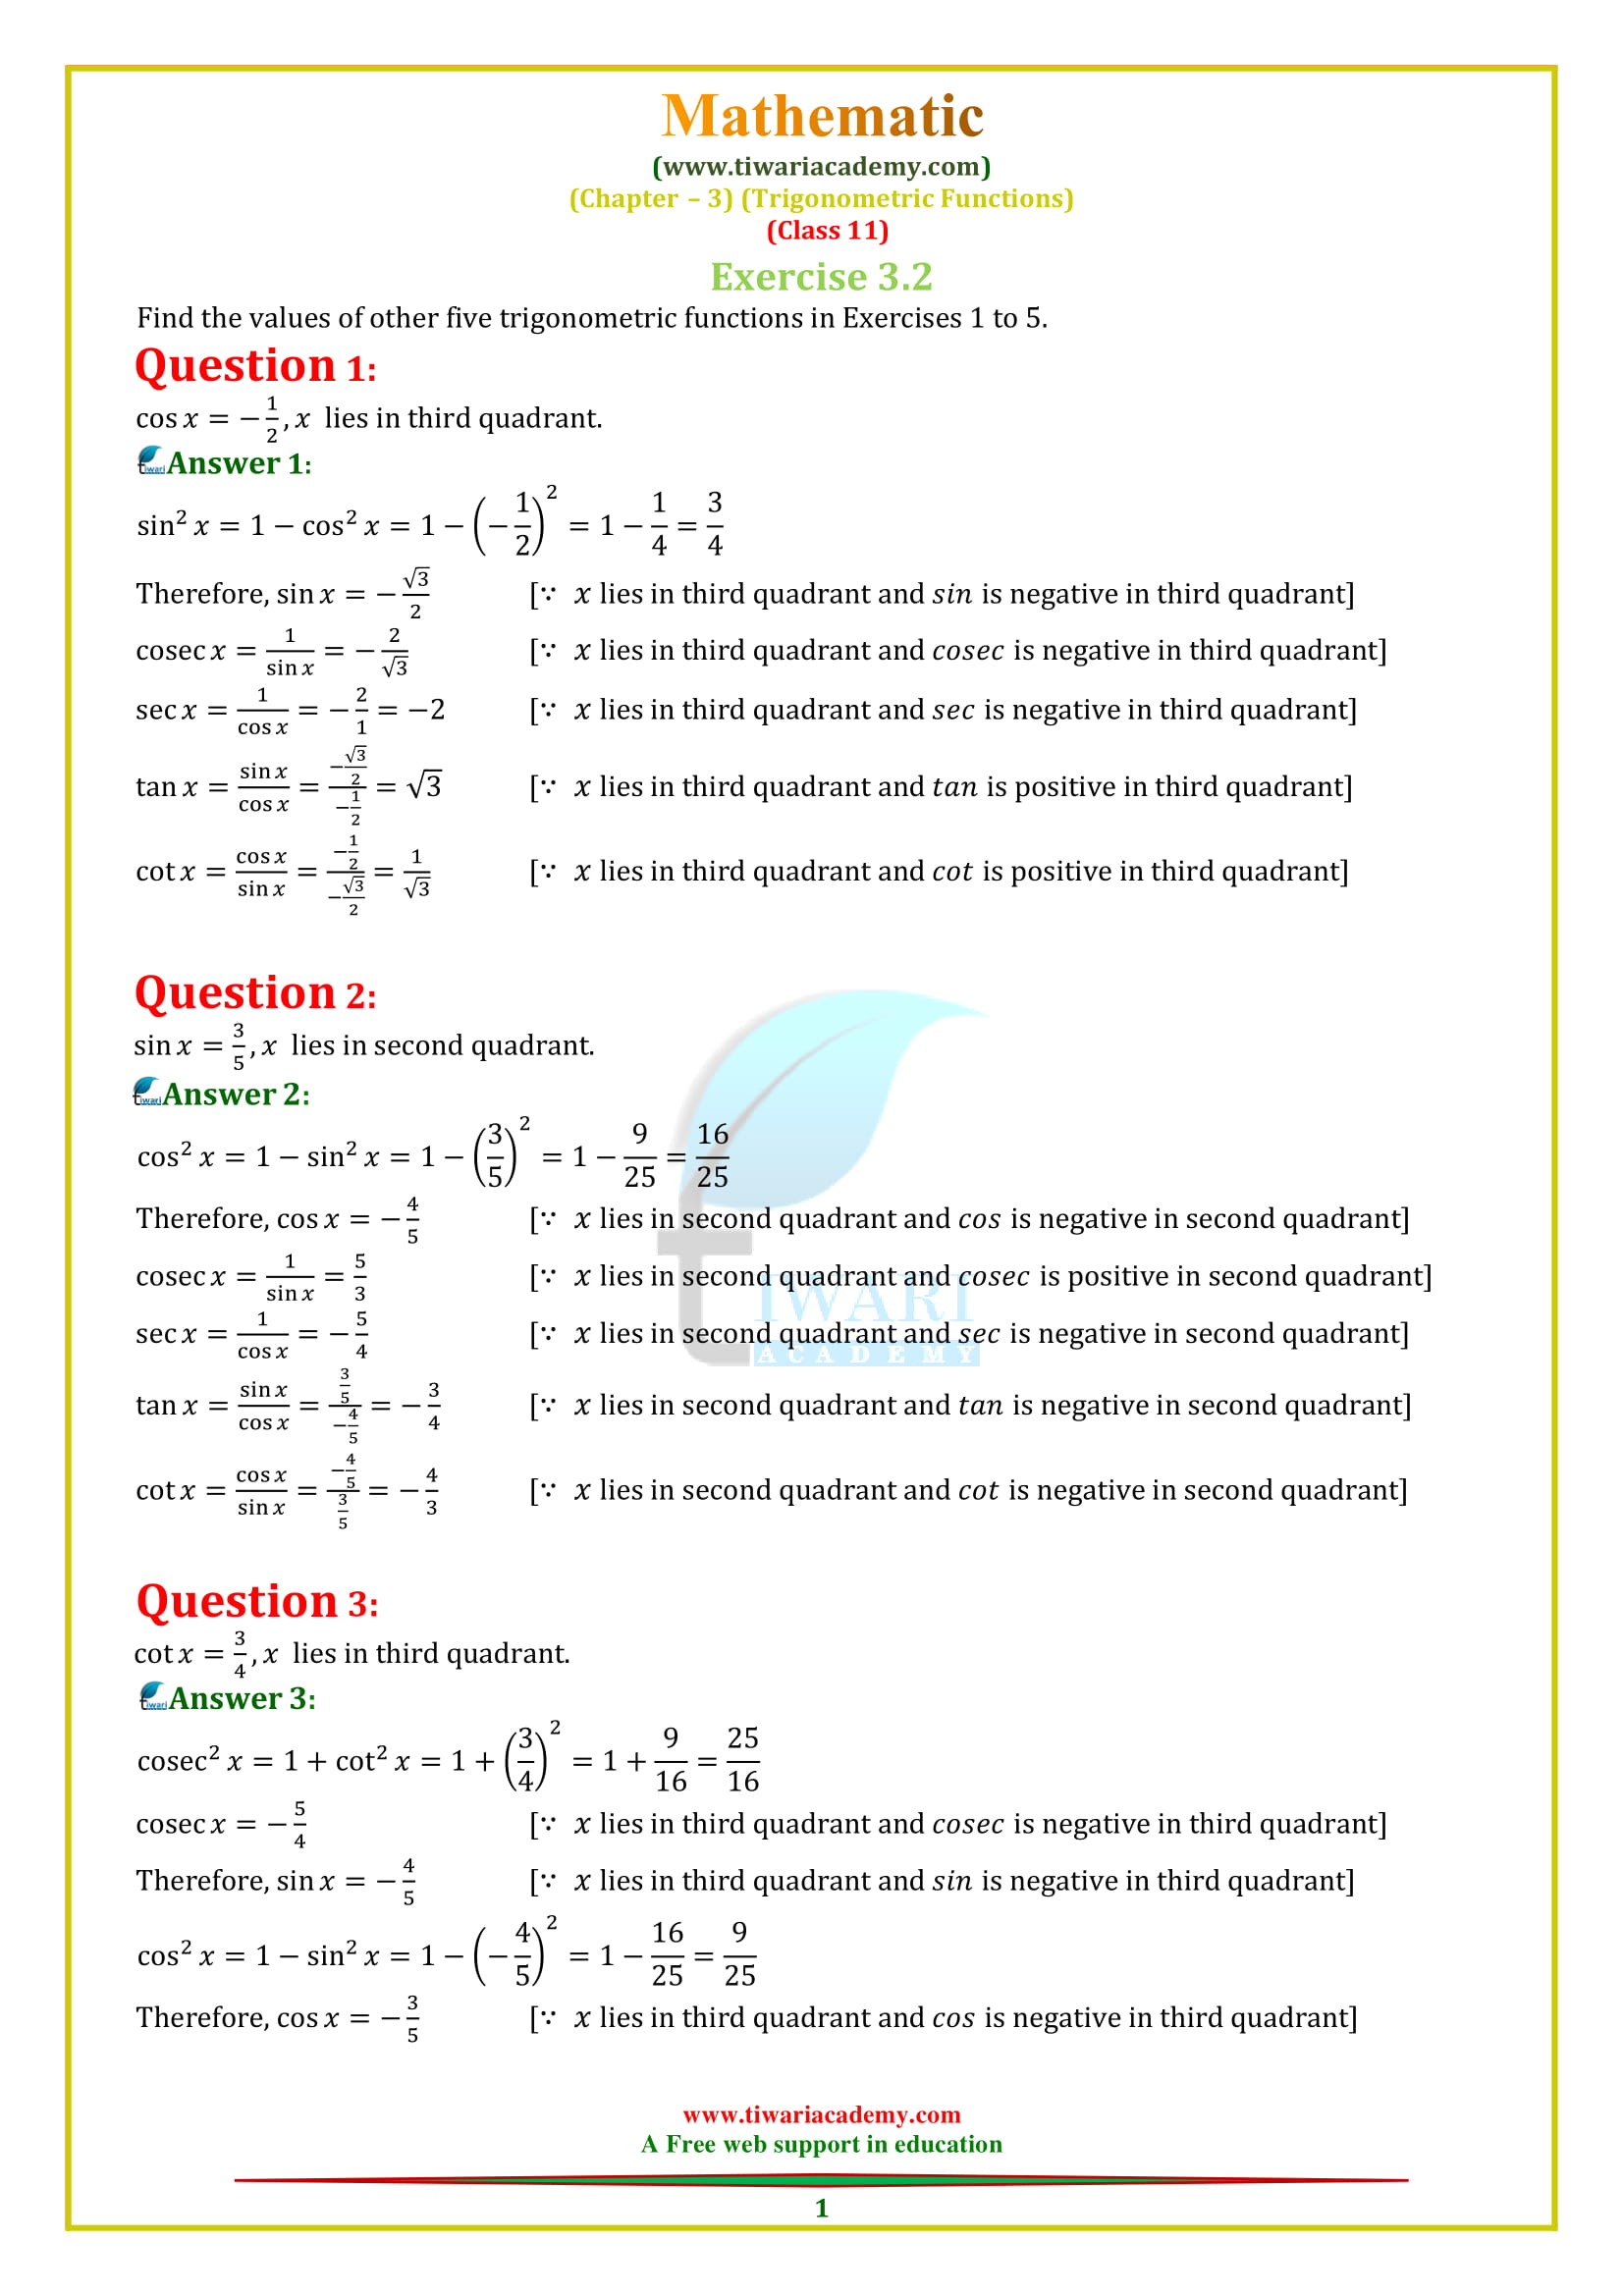 NCERT Solutions for Class 11 Maths Chapter 3 Exercise 3.2 in English medium